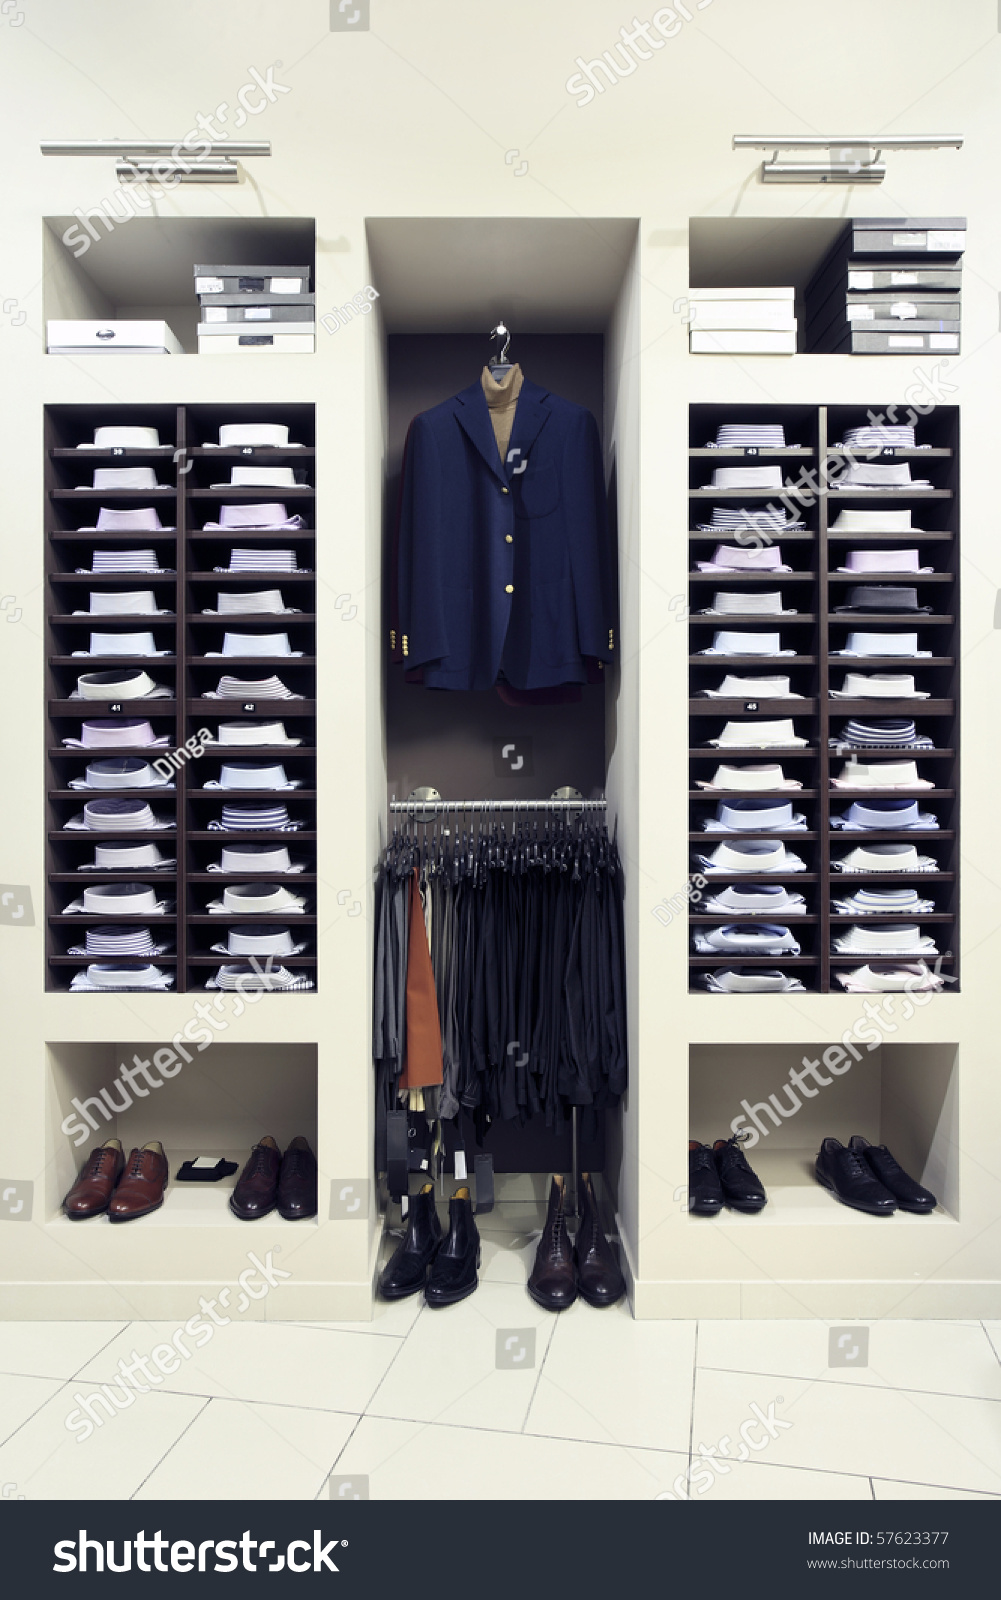 Stylish Clothes In A Modern Shop Interior Stock Photo 57623377 ...